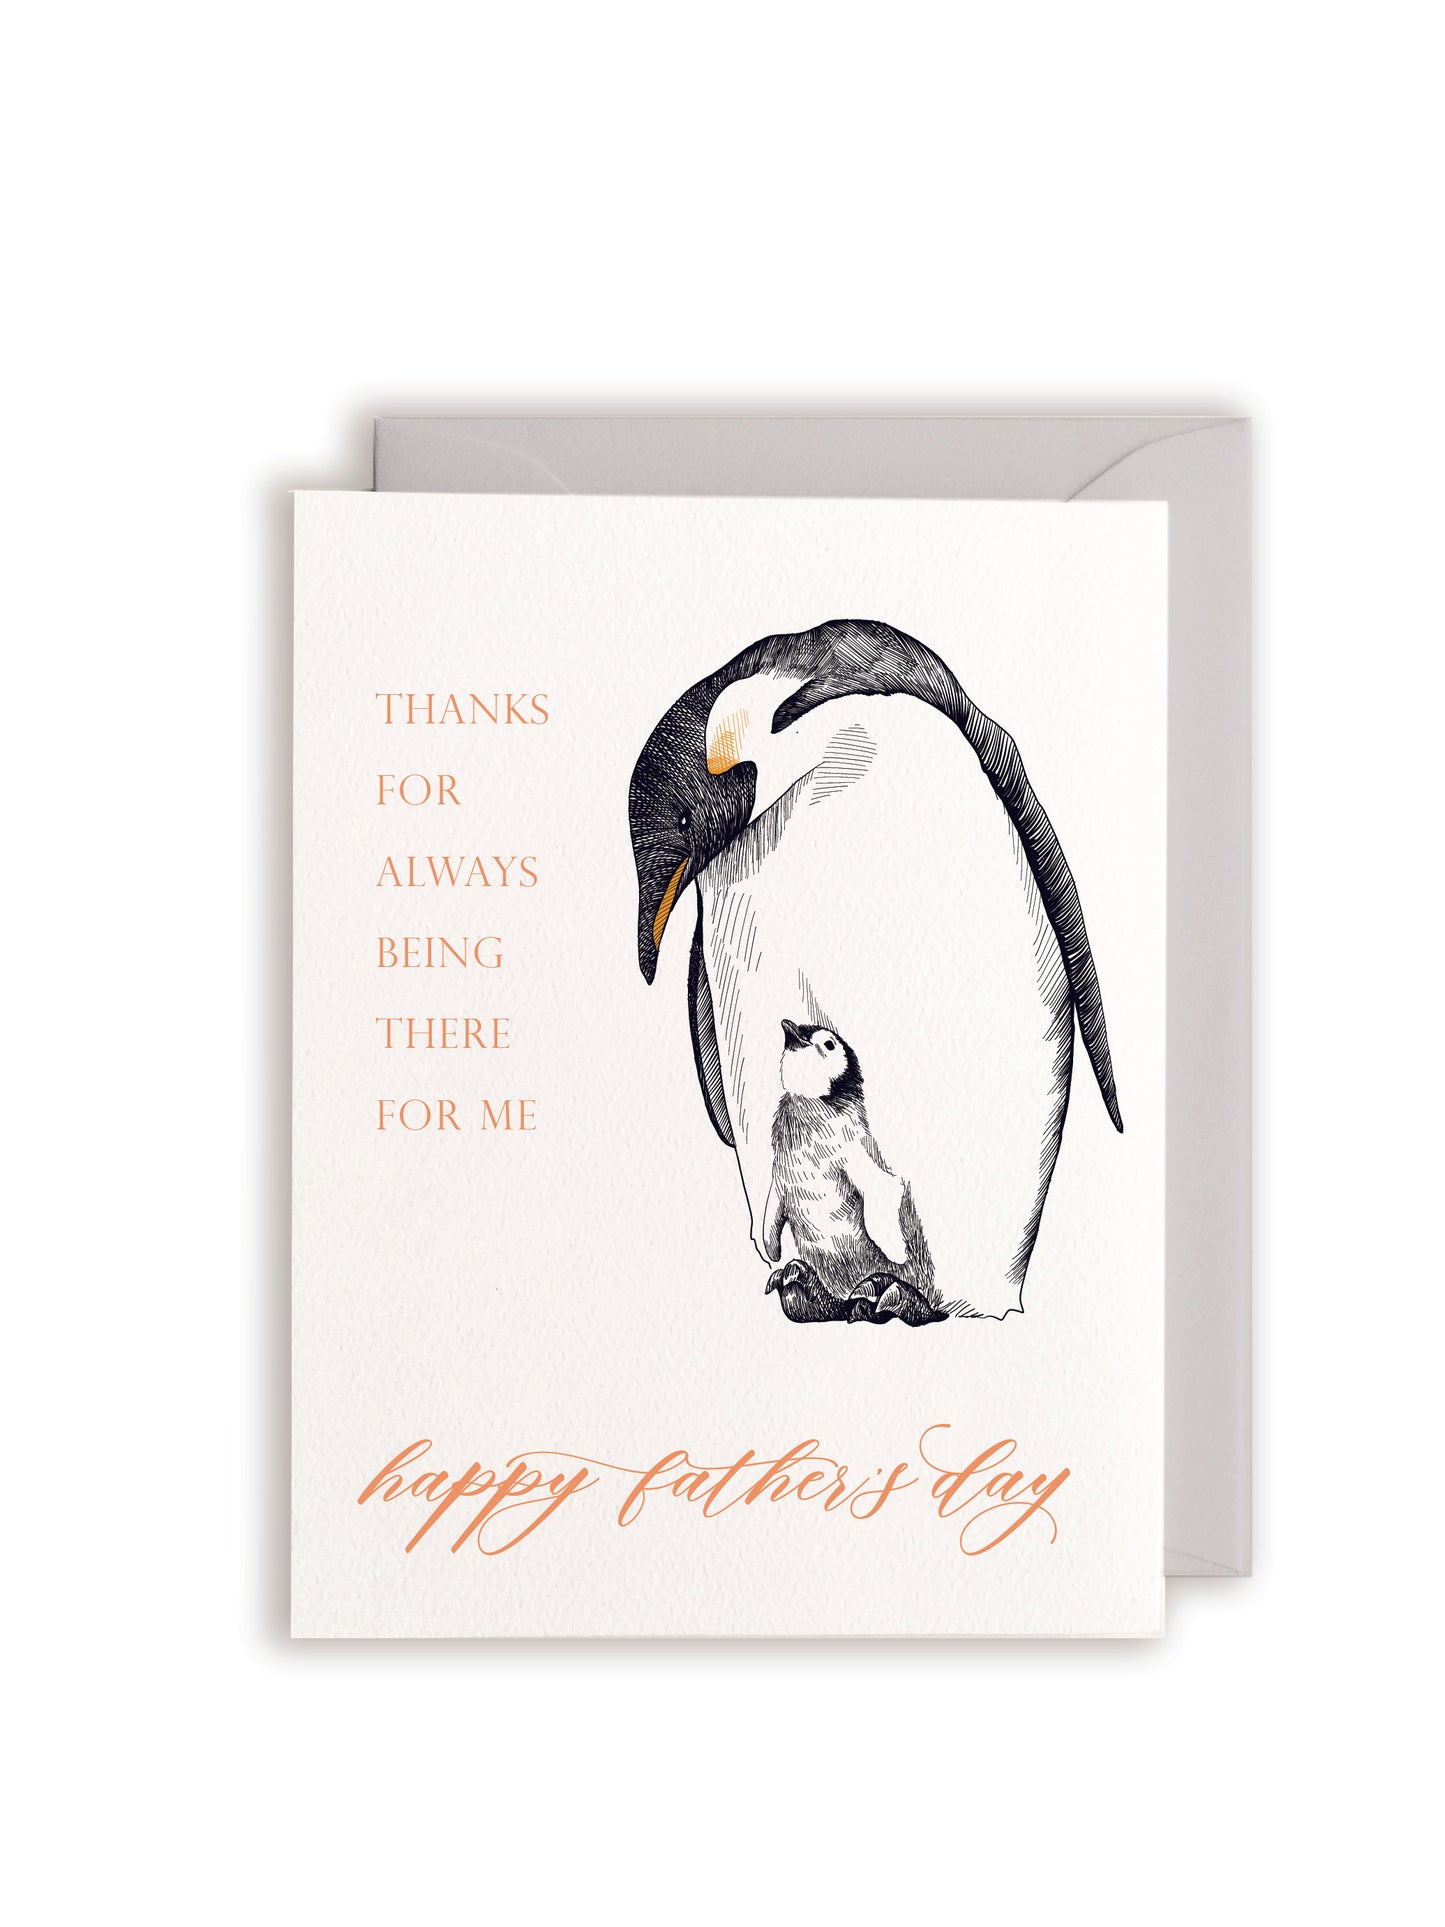 Letterpress father's day card with a big and small penguin that says " Thanks for always being there for me Happy Father's Day" by Rust Belt Love